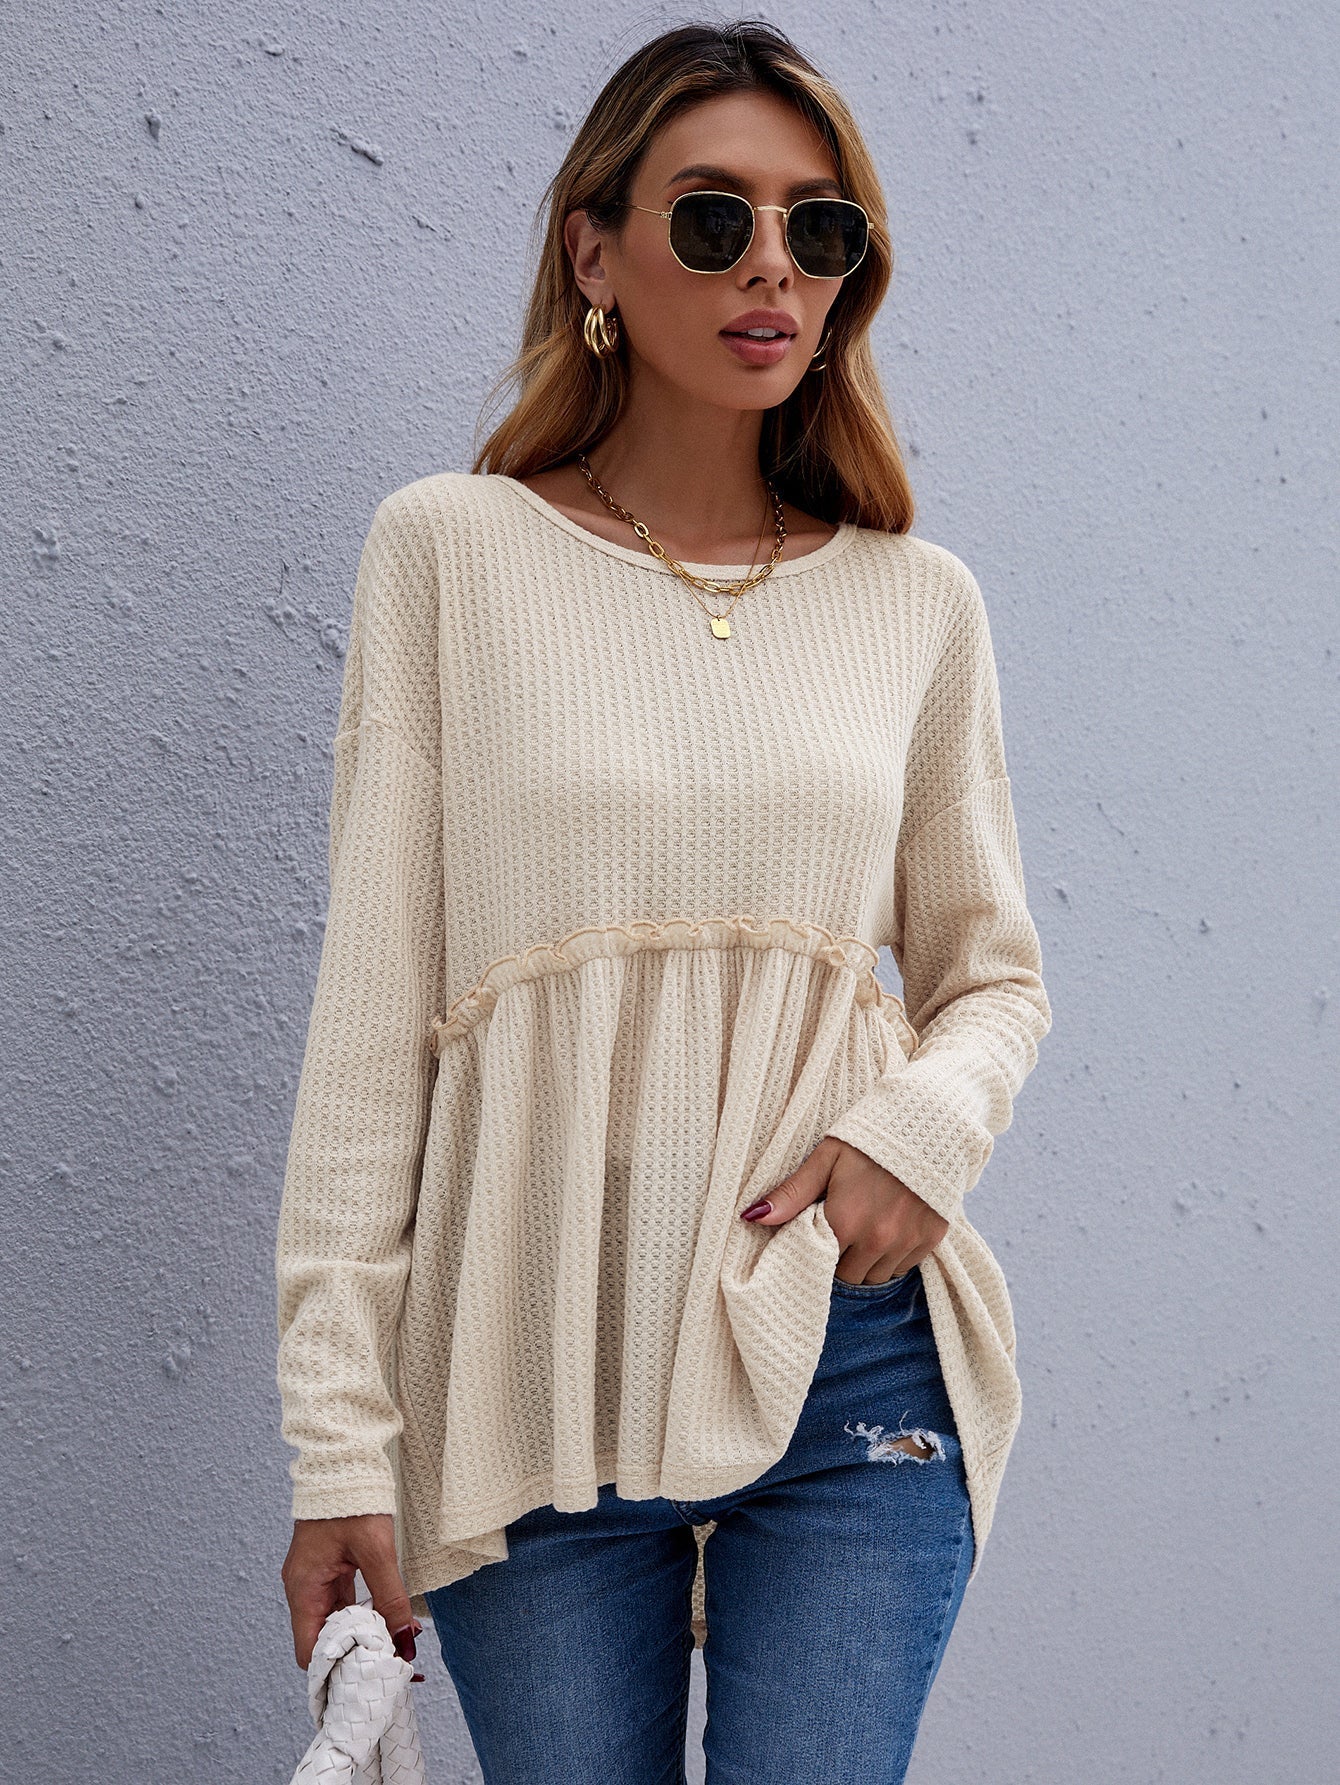 New round neck solid color waffle pleated casual long-sleeved sweater Sai Feel